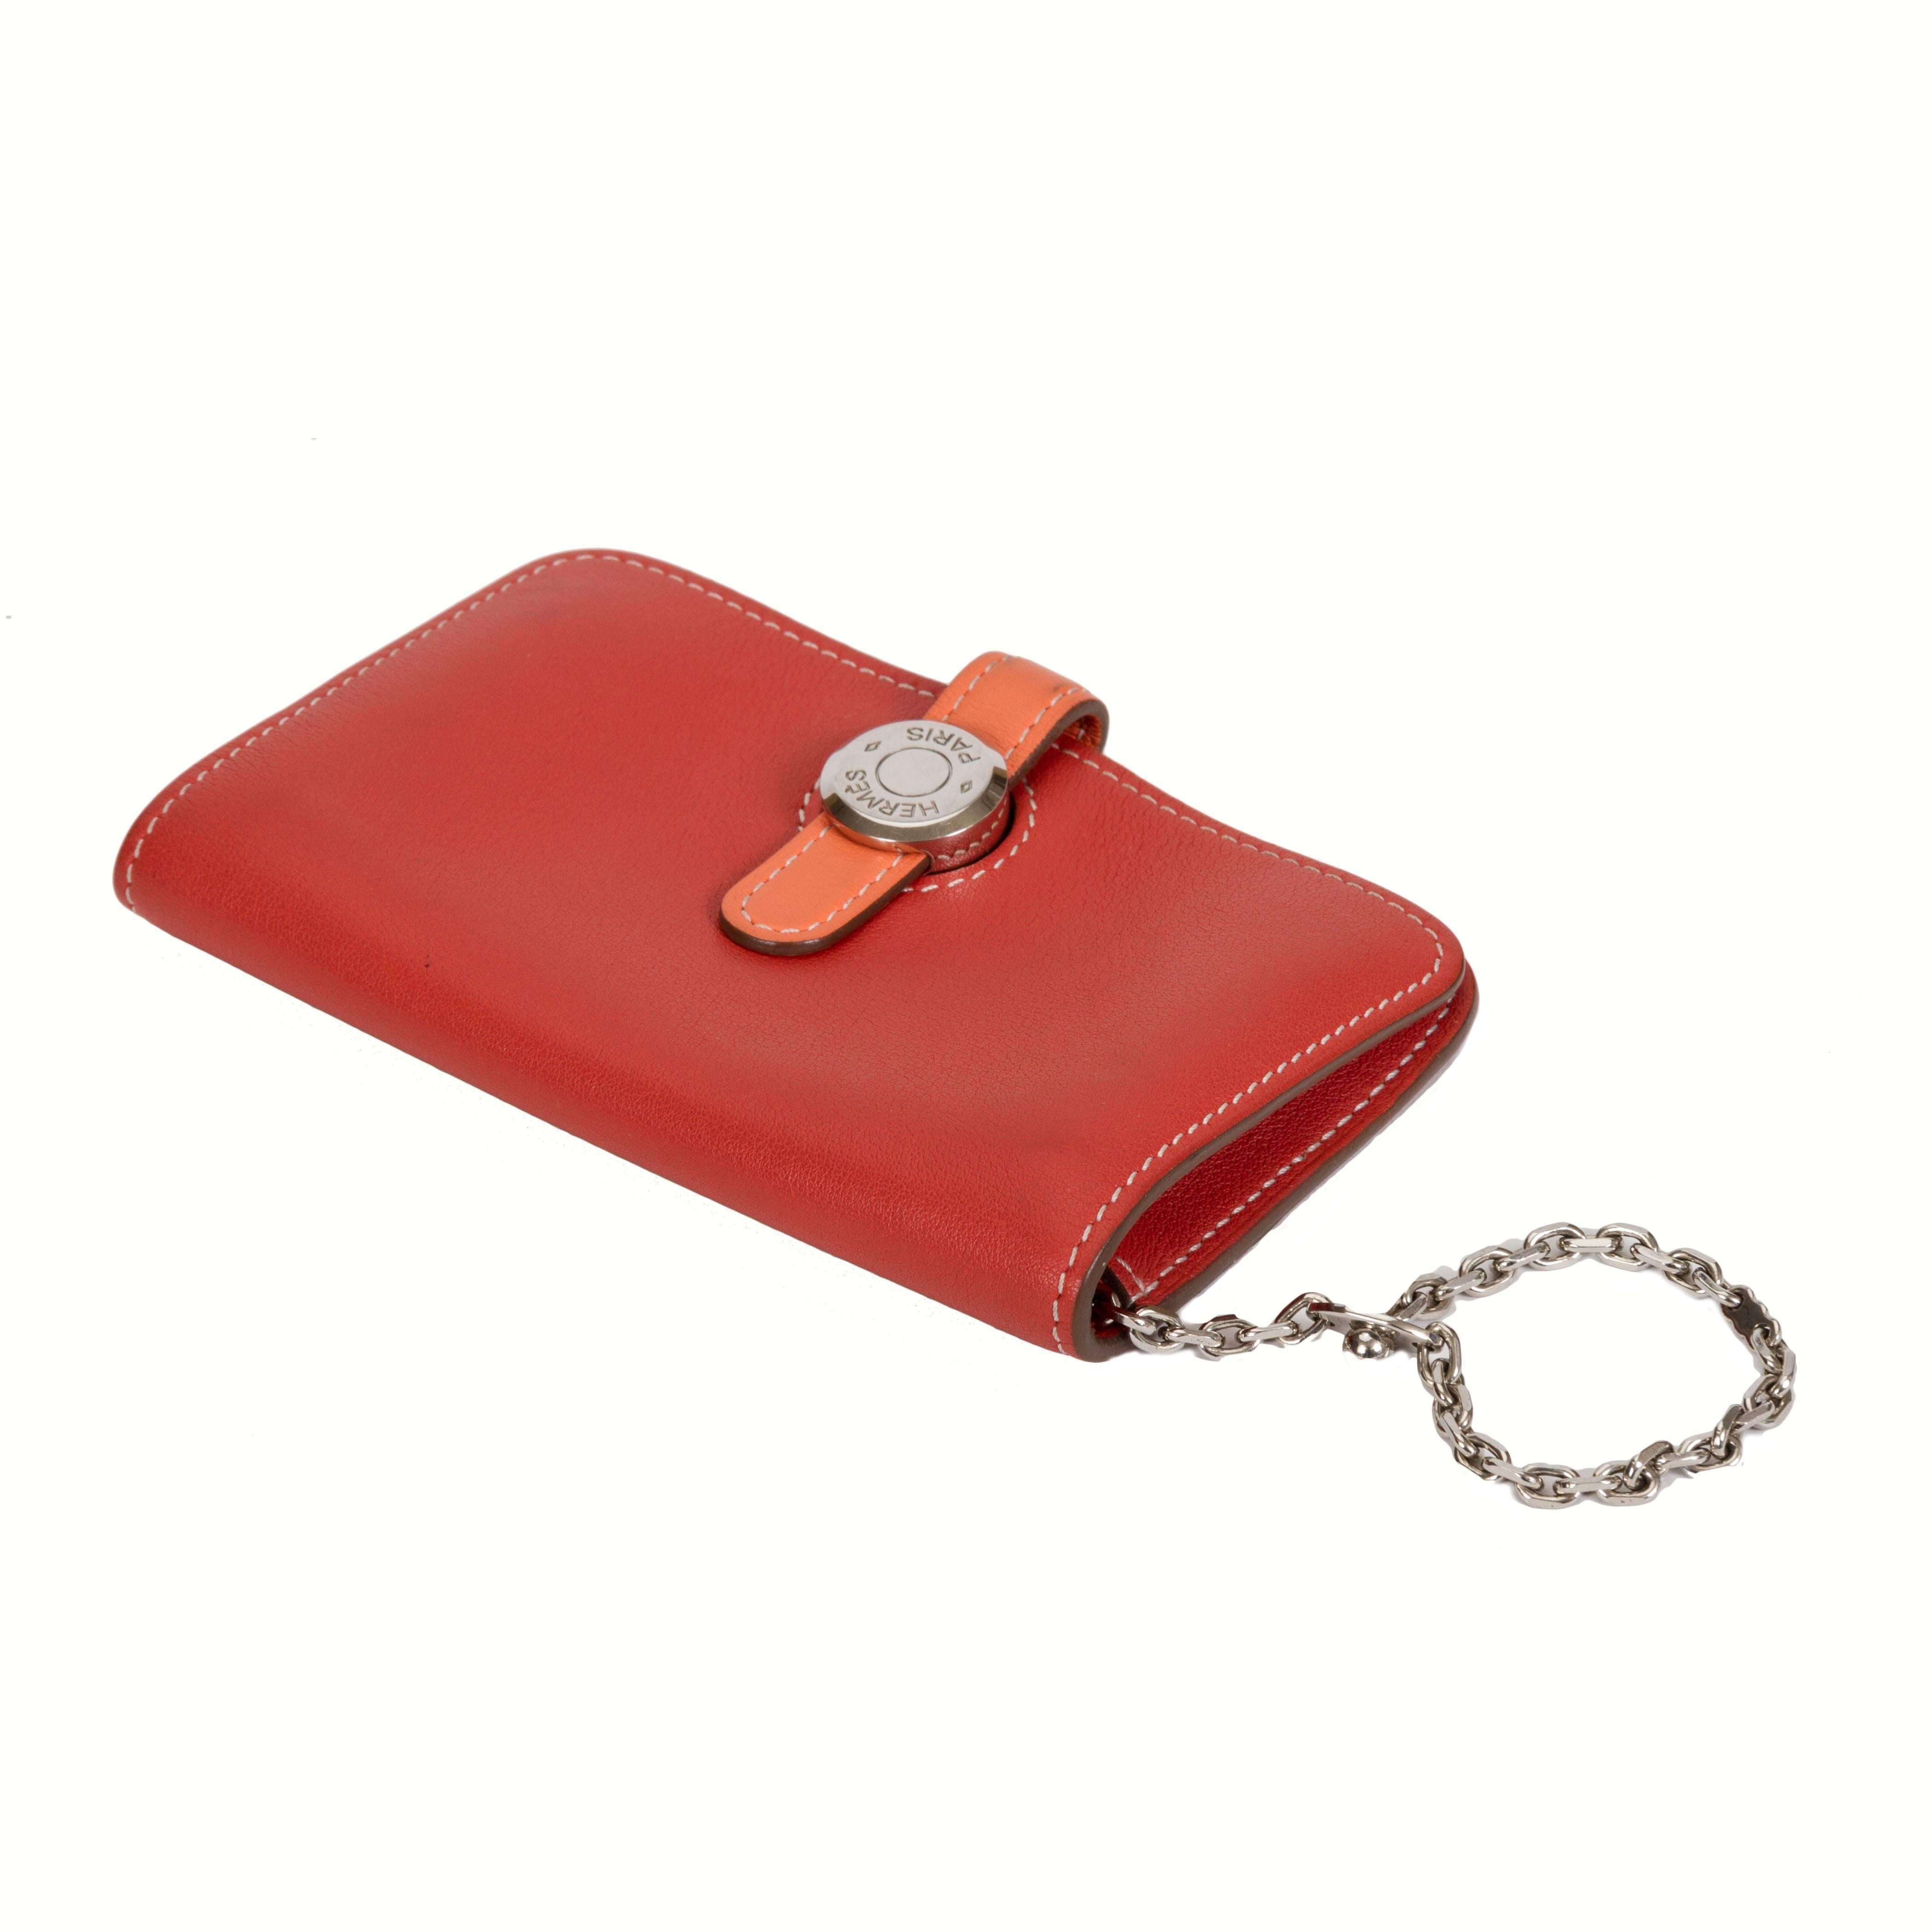 Hermès Bicolor Dogon Wallet With Chain